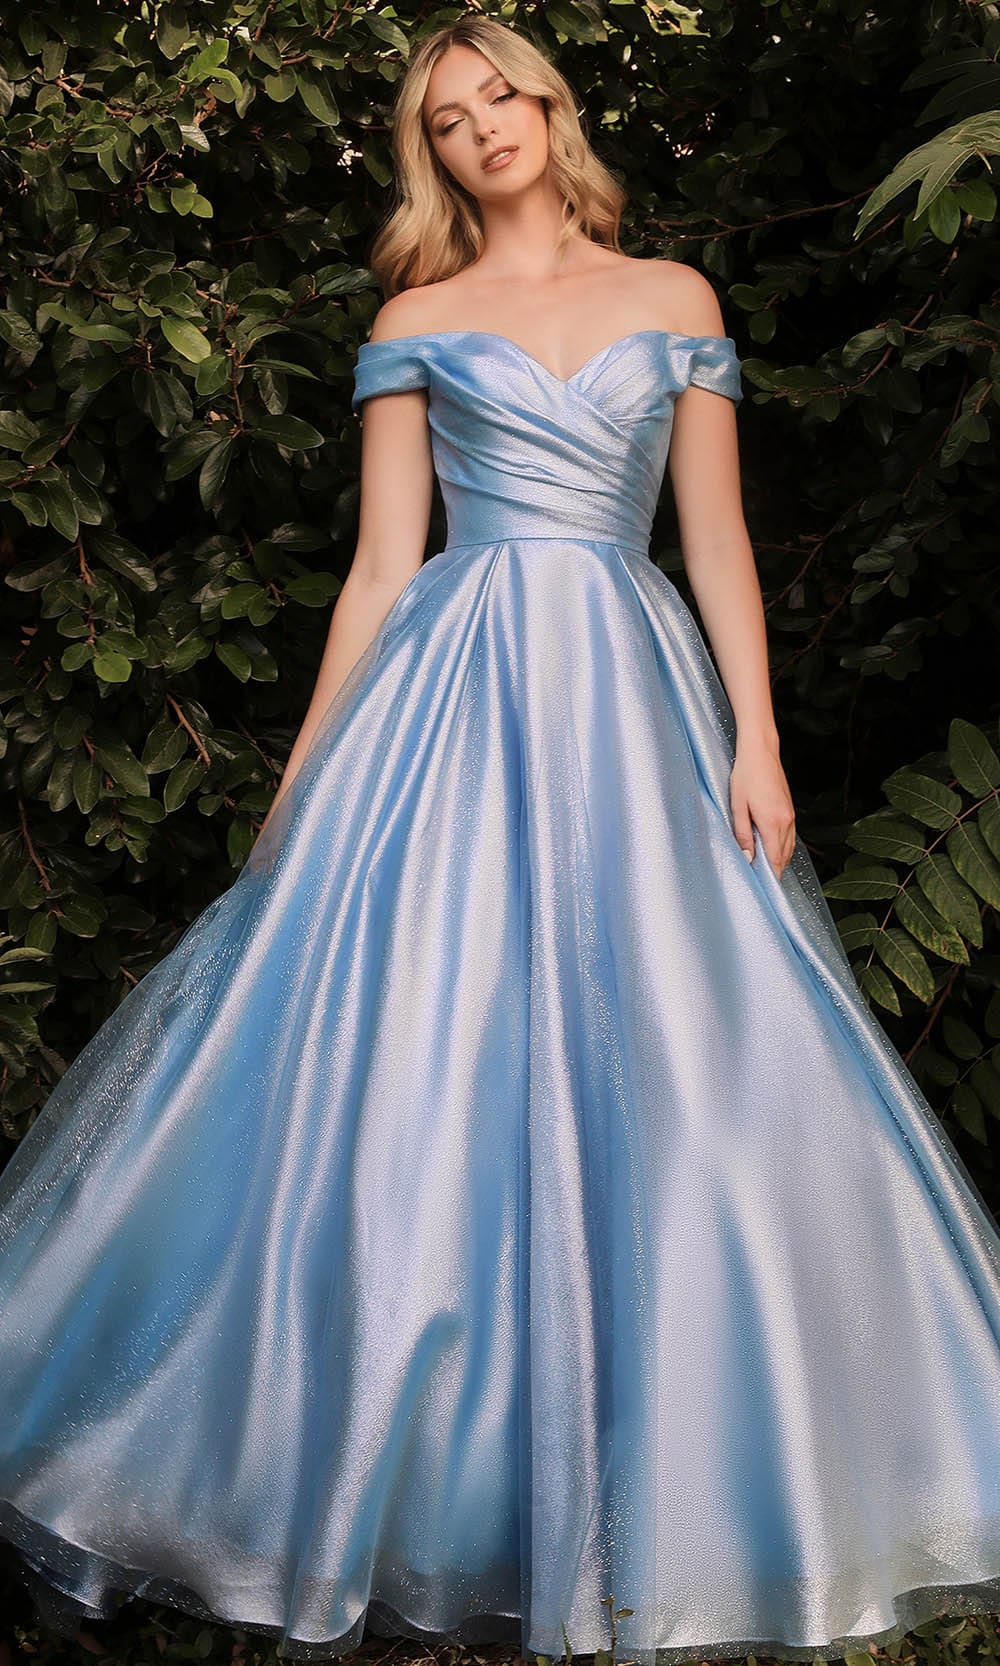 Cinderella's Dresses for Lily James: Details from the Costume Designer |  Ball gowns fantasy, Fairytale dress, Ball gowns